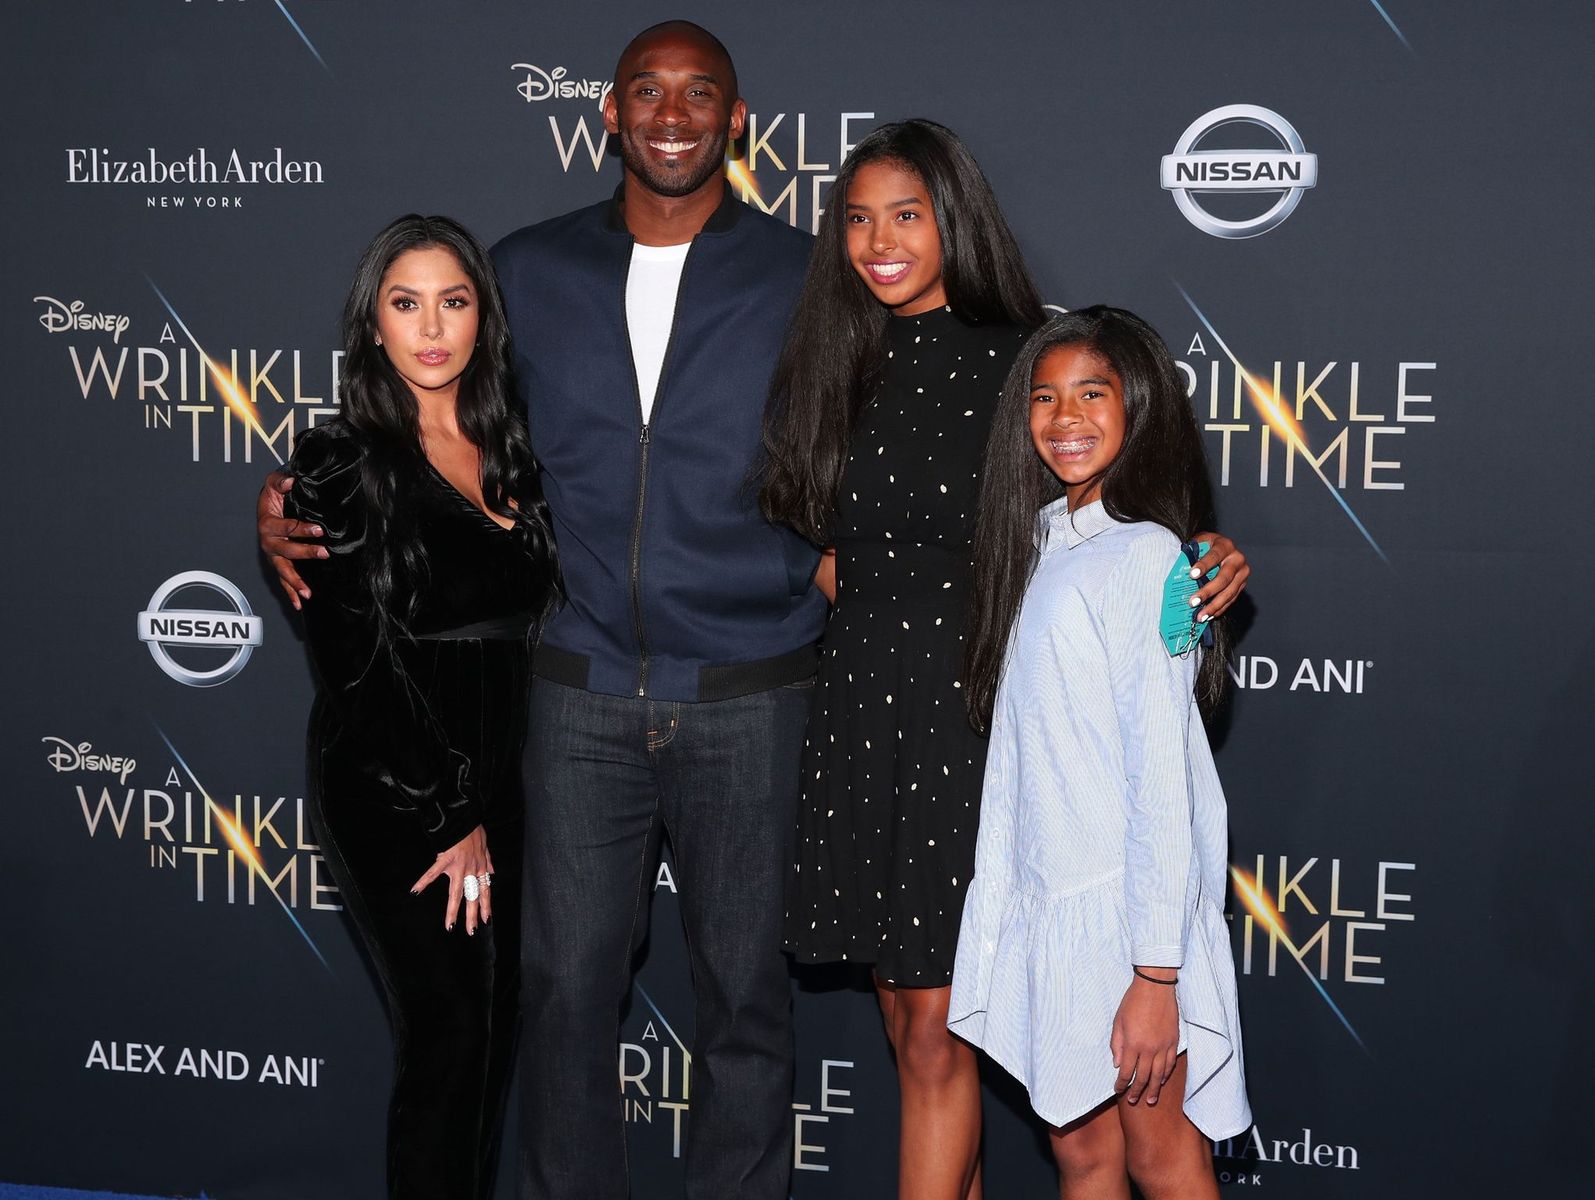 Vanessa and Kobe Bryant and their children at the premiere of "A Wrinkle In Time" on February 26, 2018. | Source: Getty Images